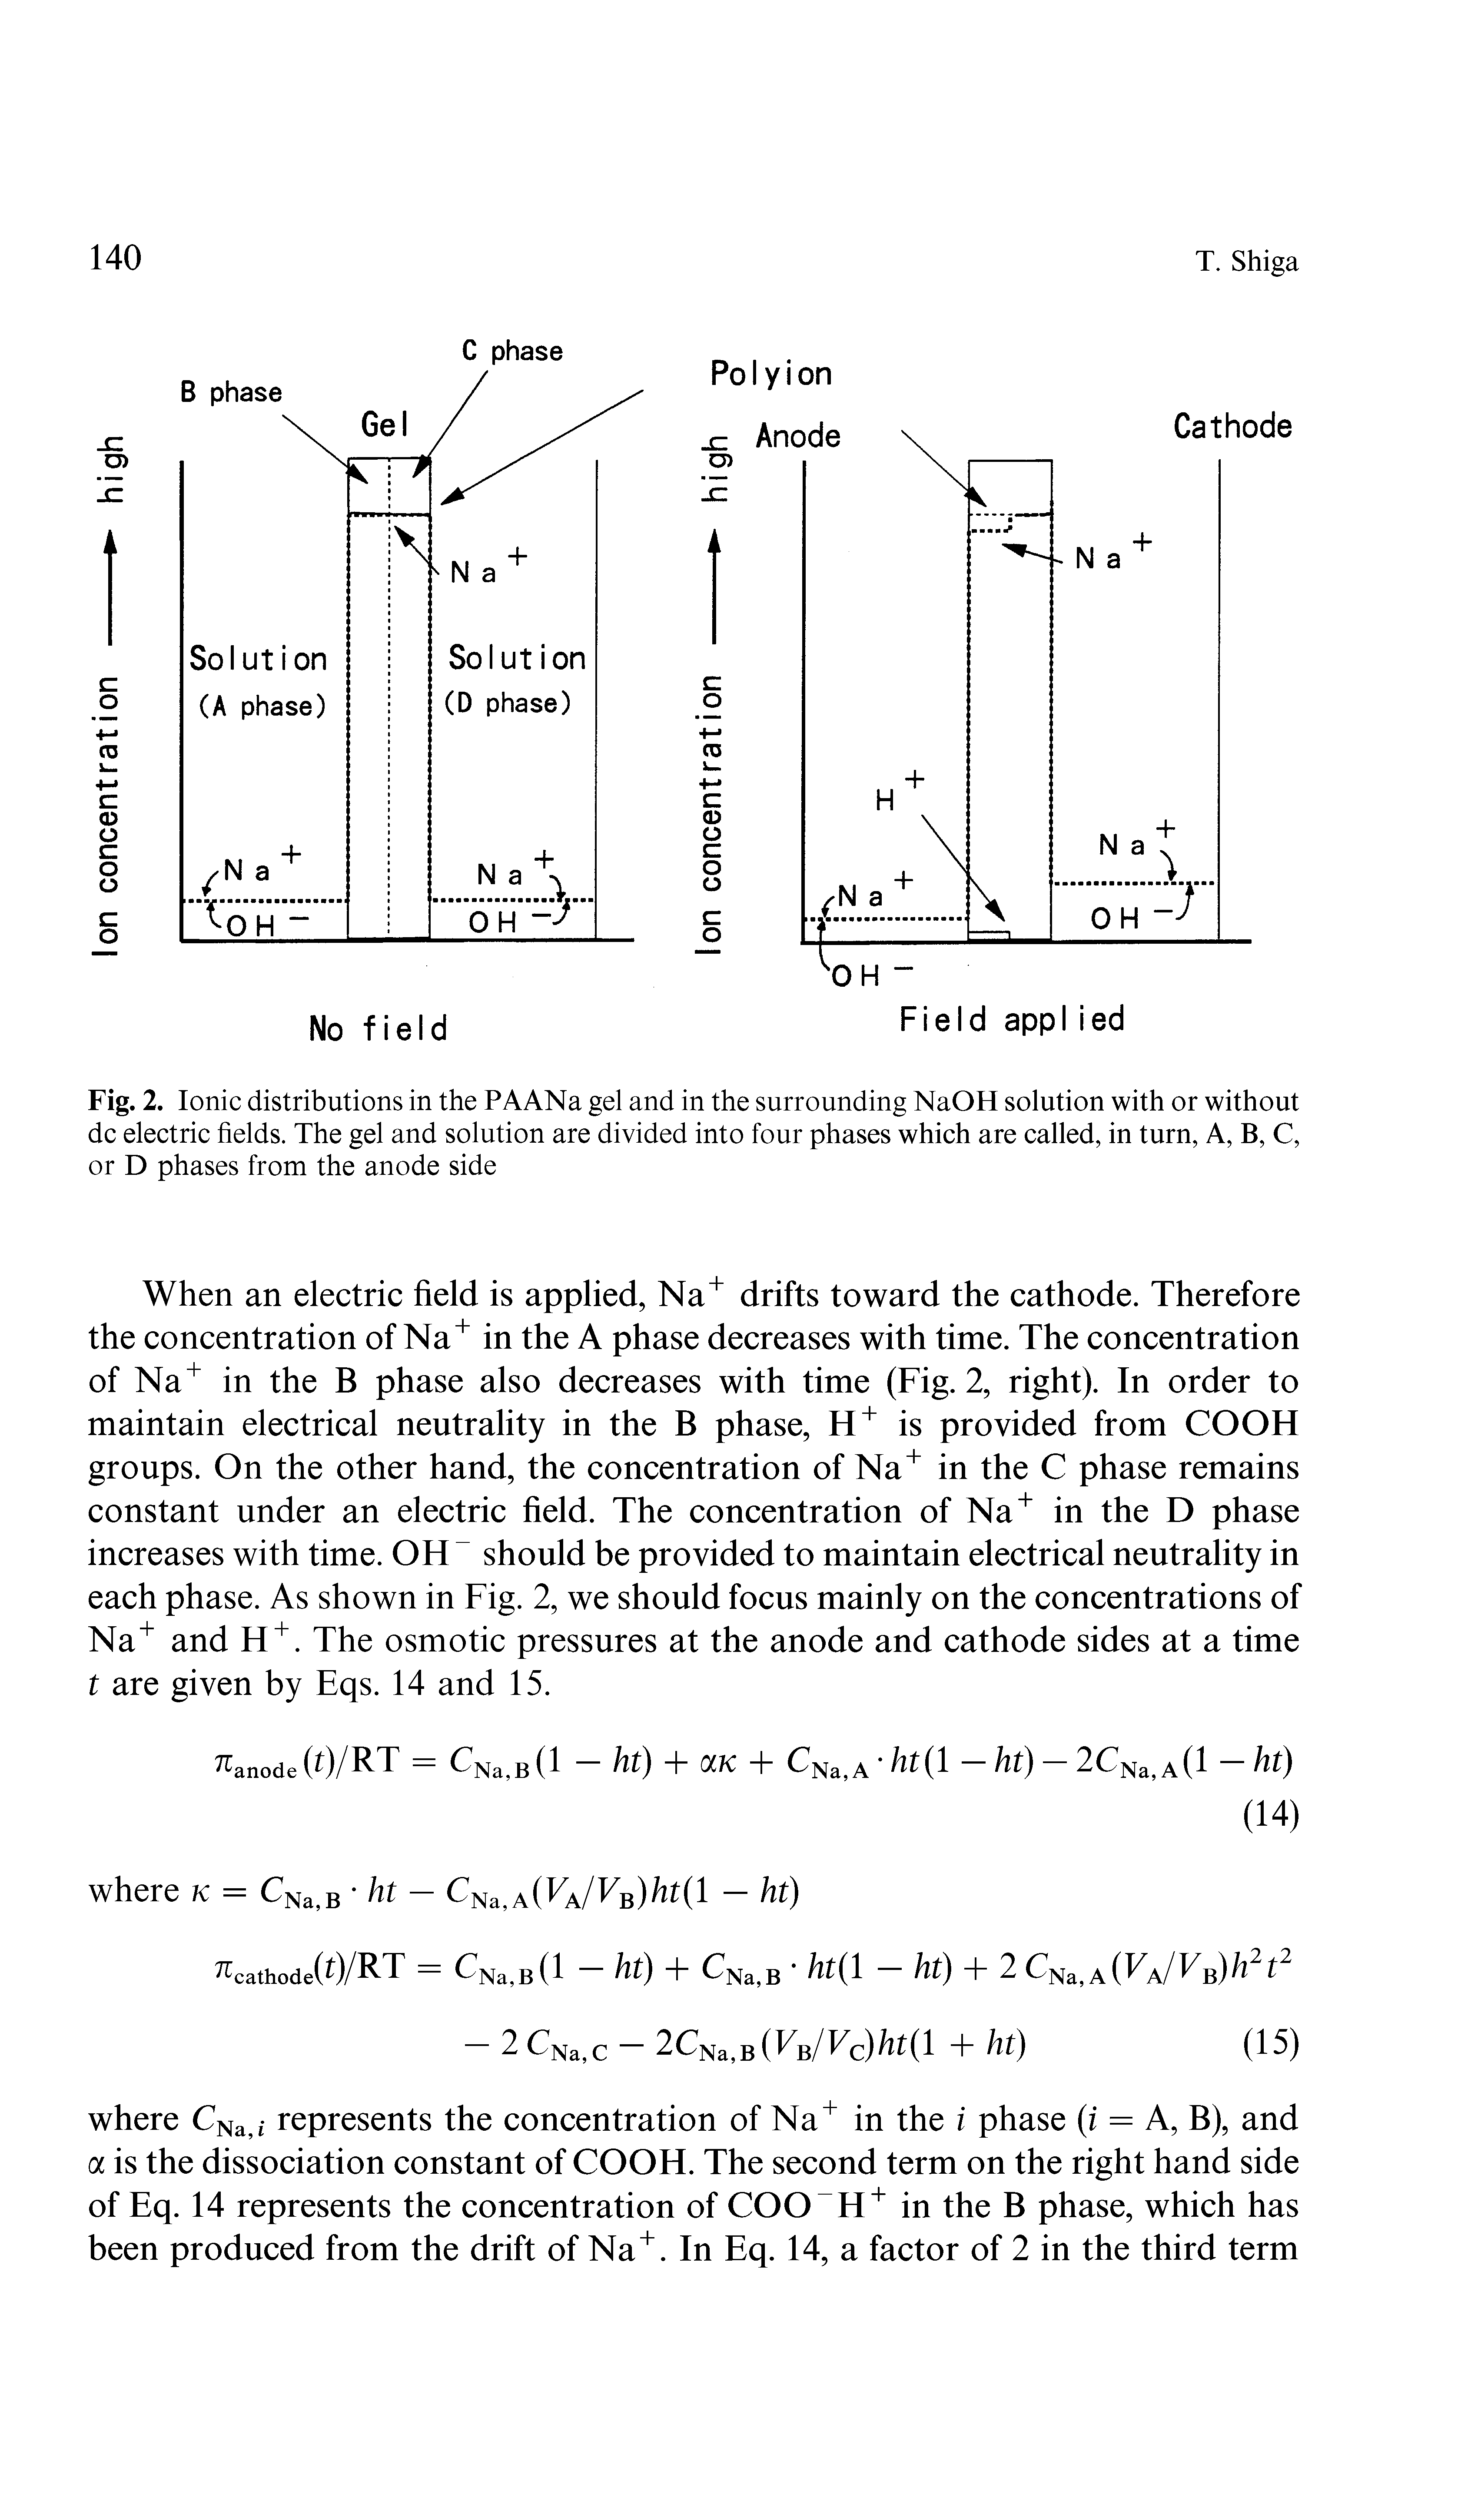 Fig. 2. Ionic distributions in the PAANa gel and in the surrounding NaOH solution with or without dc electric fields. The gel and solution are divided into four phases which are called, in turn, A, B, C, or D phases from the anode side...